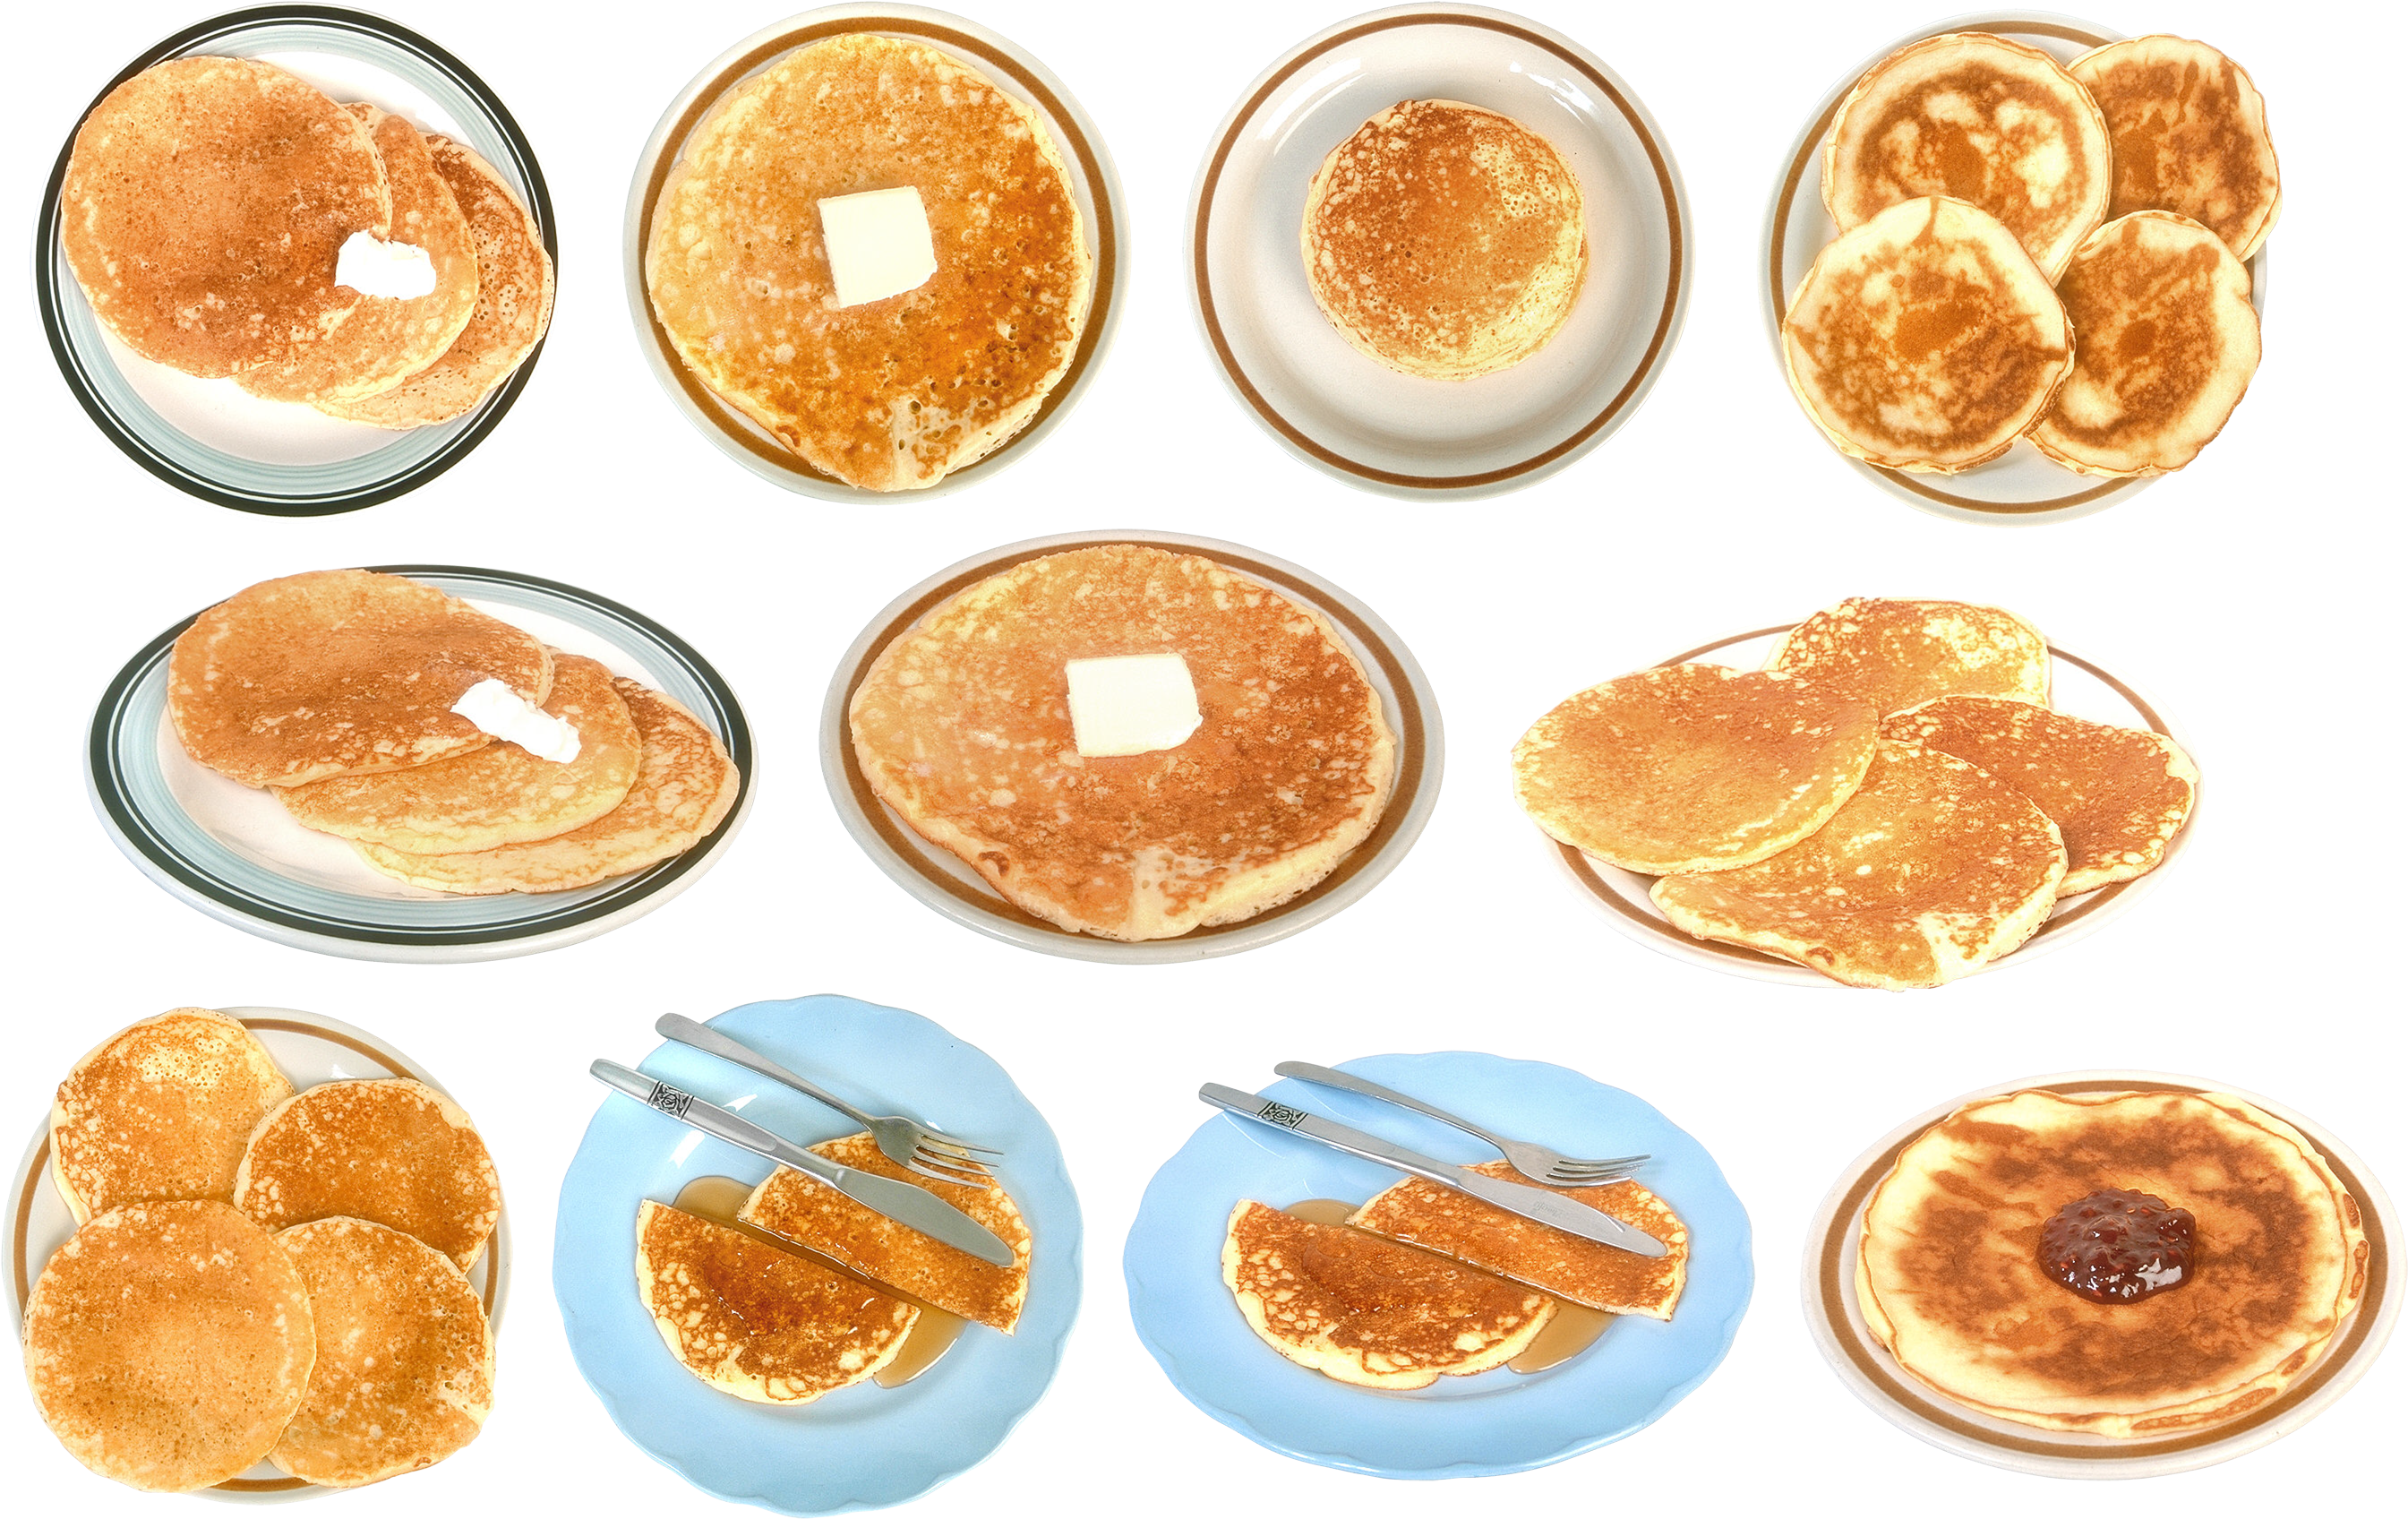 A Collage Of Pancakes With Butter On Plates